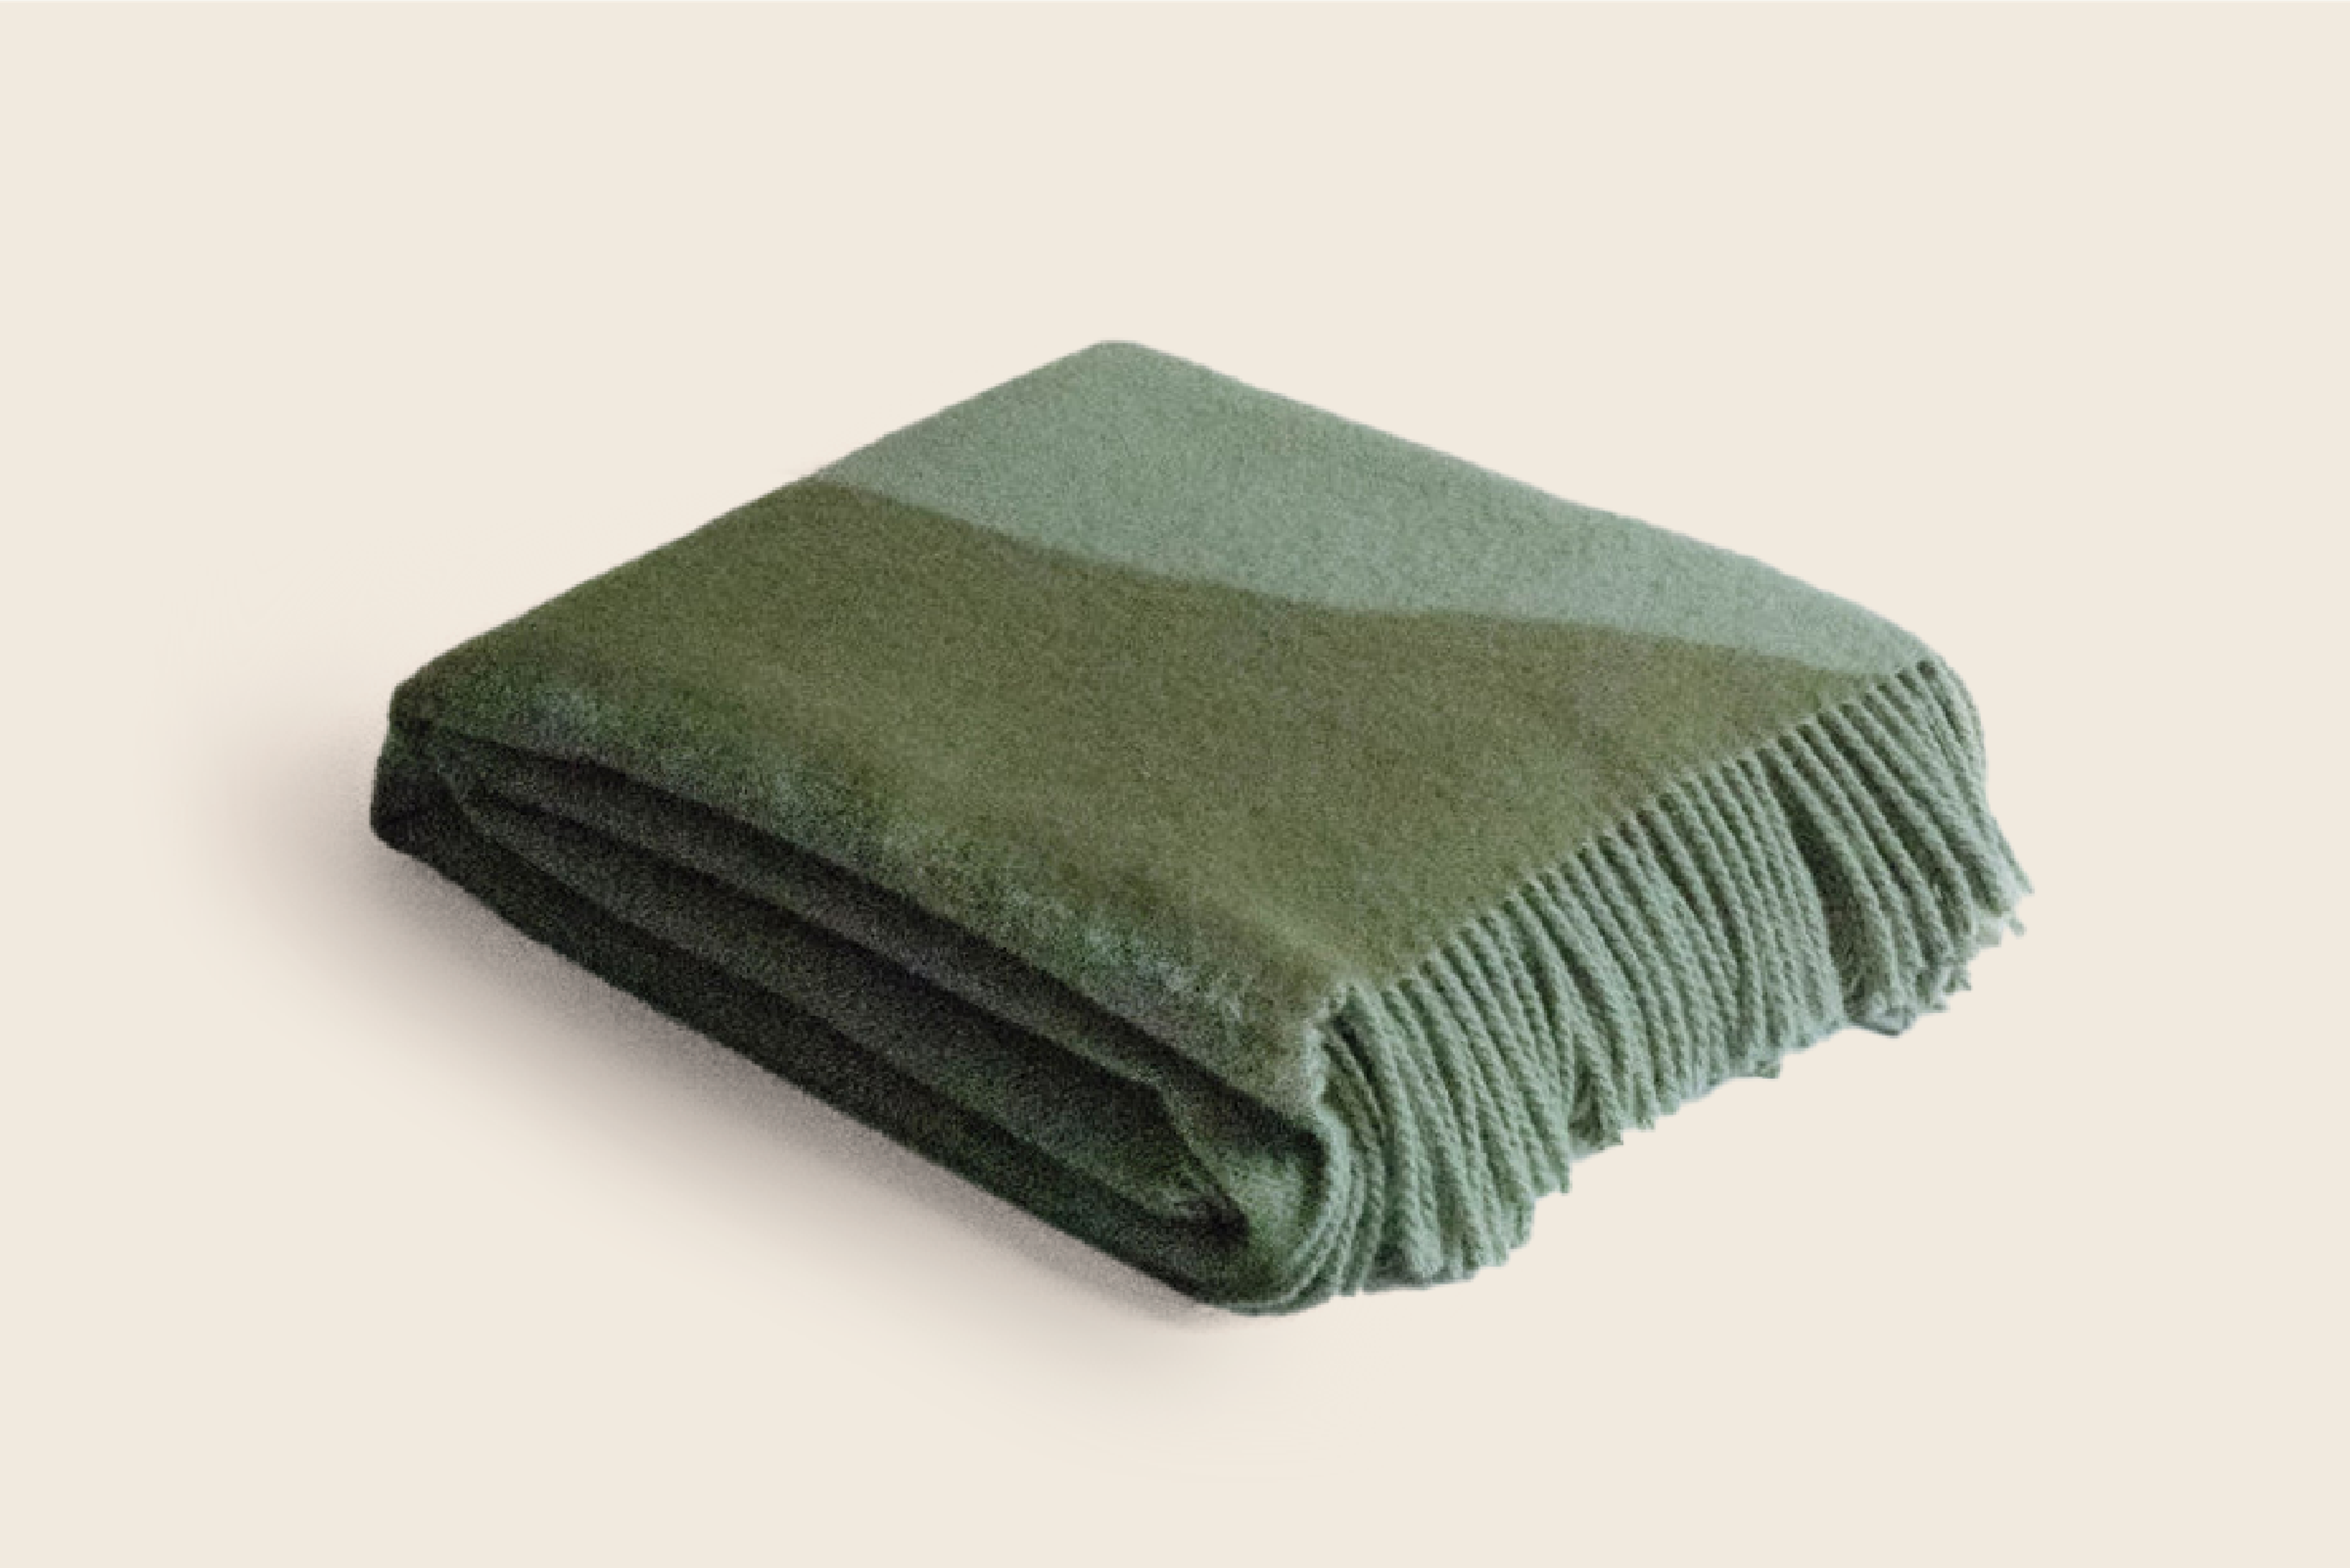 A Wool Blanket by Forestry Wool